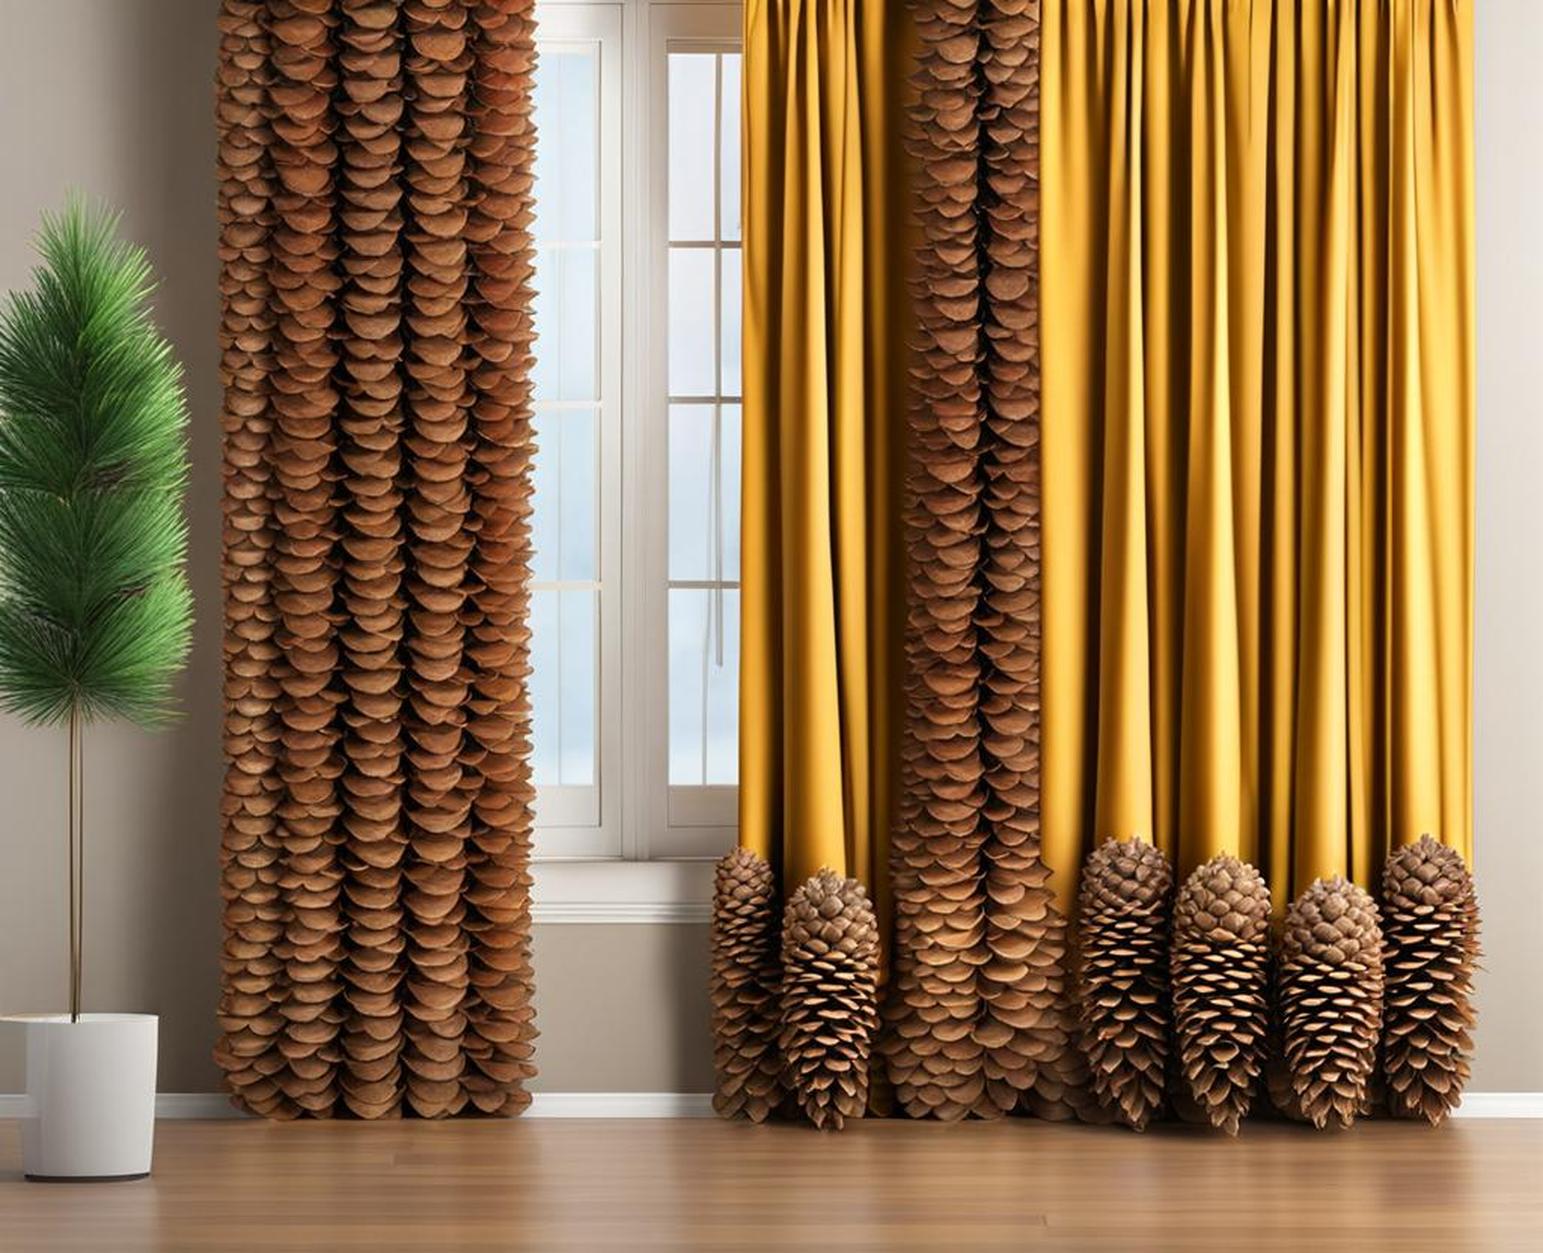 curtains with pine cones